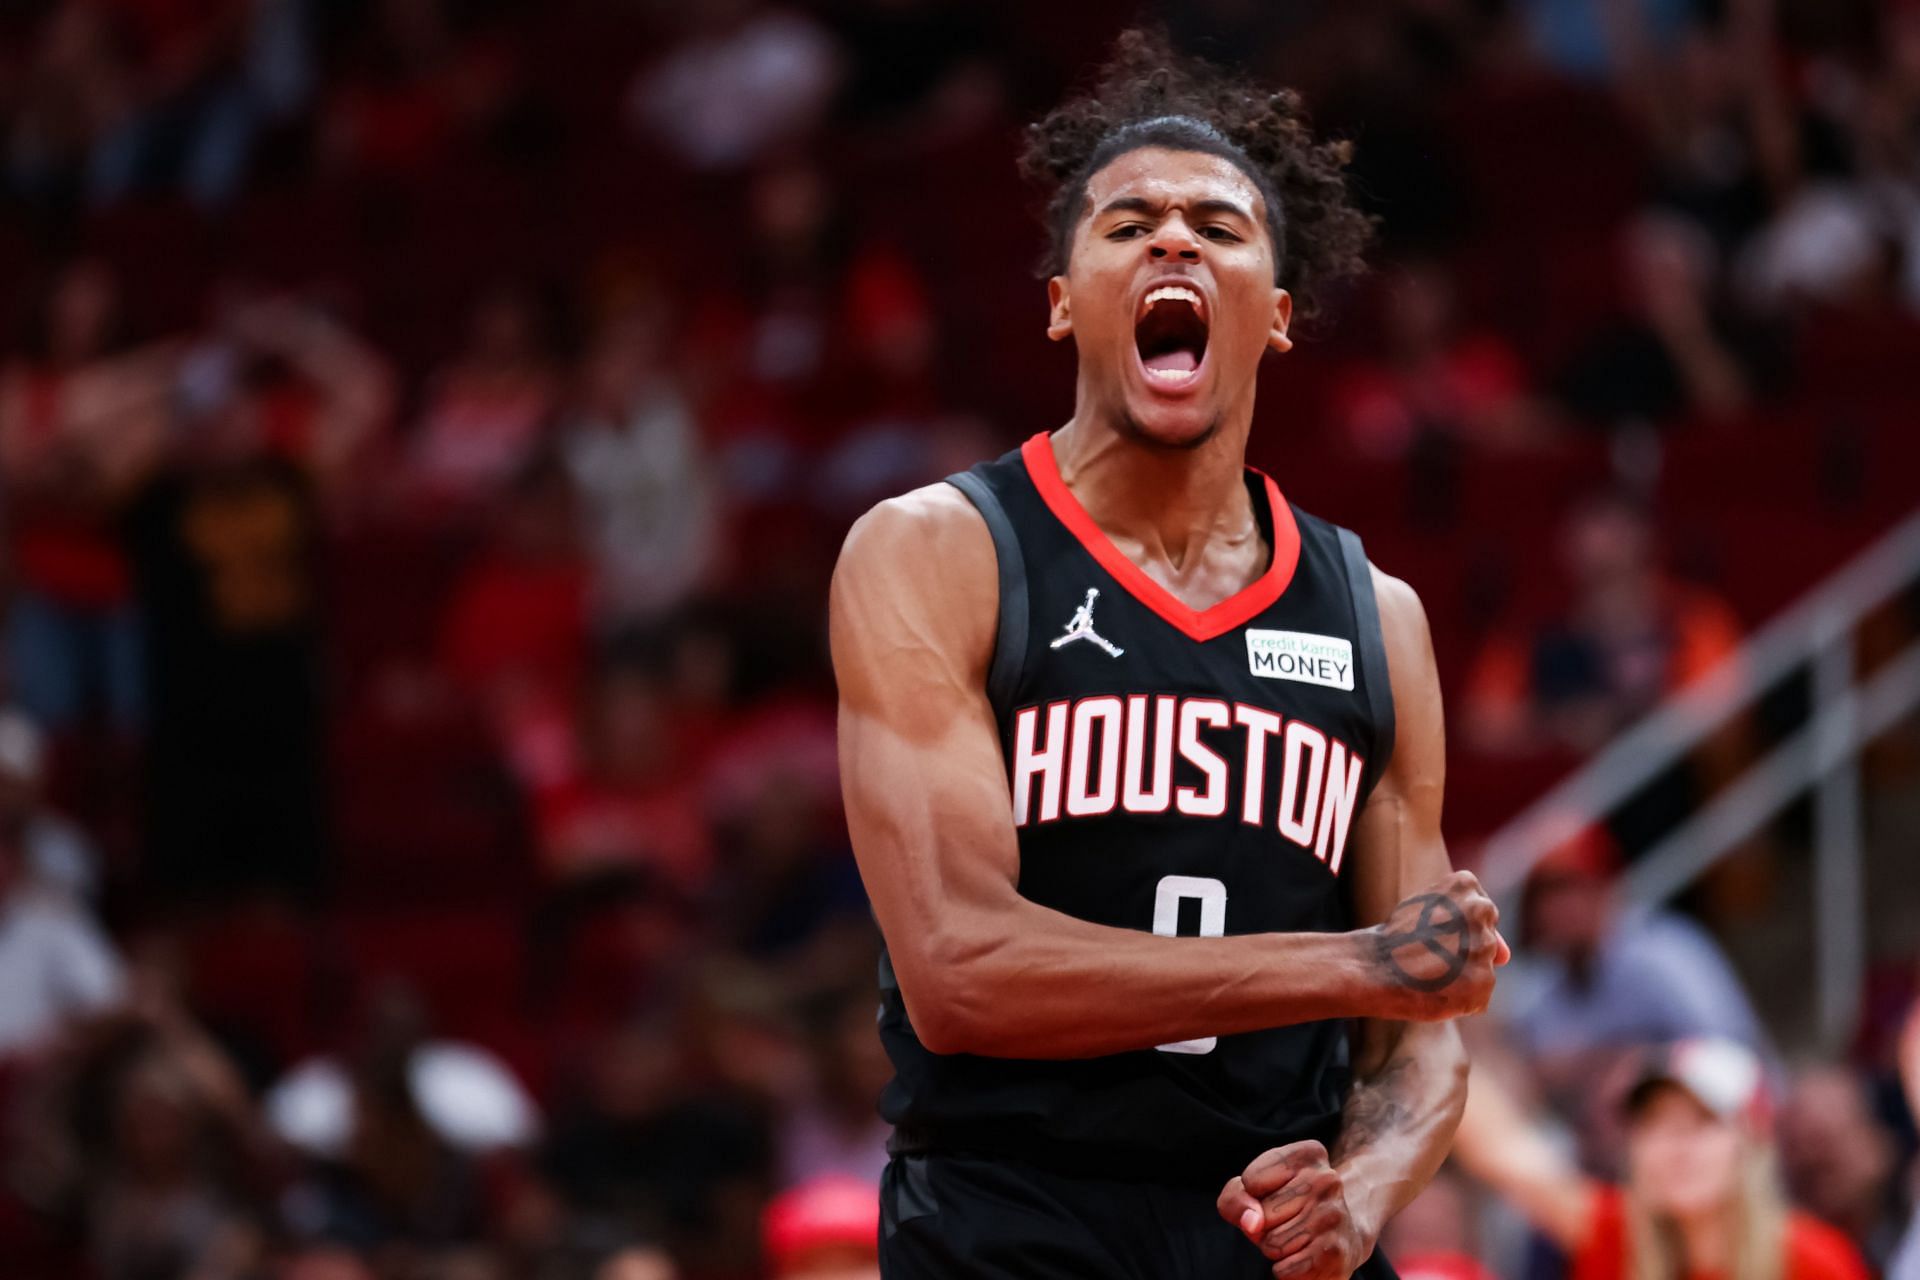 The Houston Rockets suffered a 107-97 loss to the Boston Celtics in their previous game